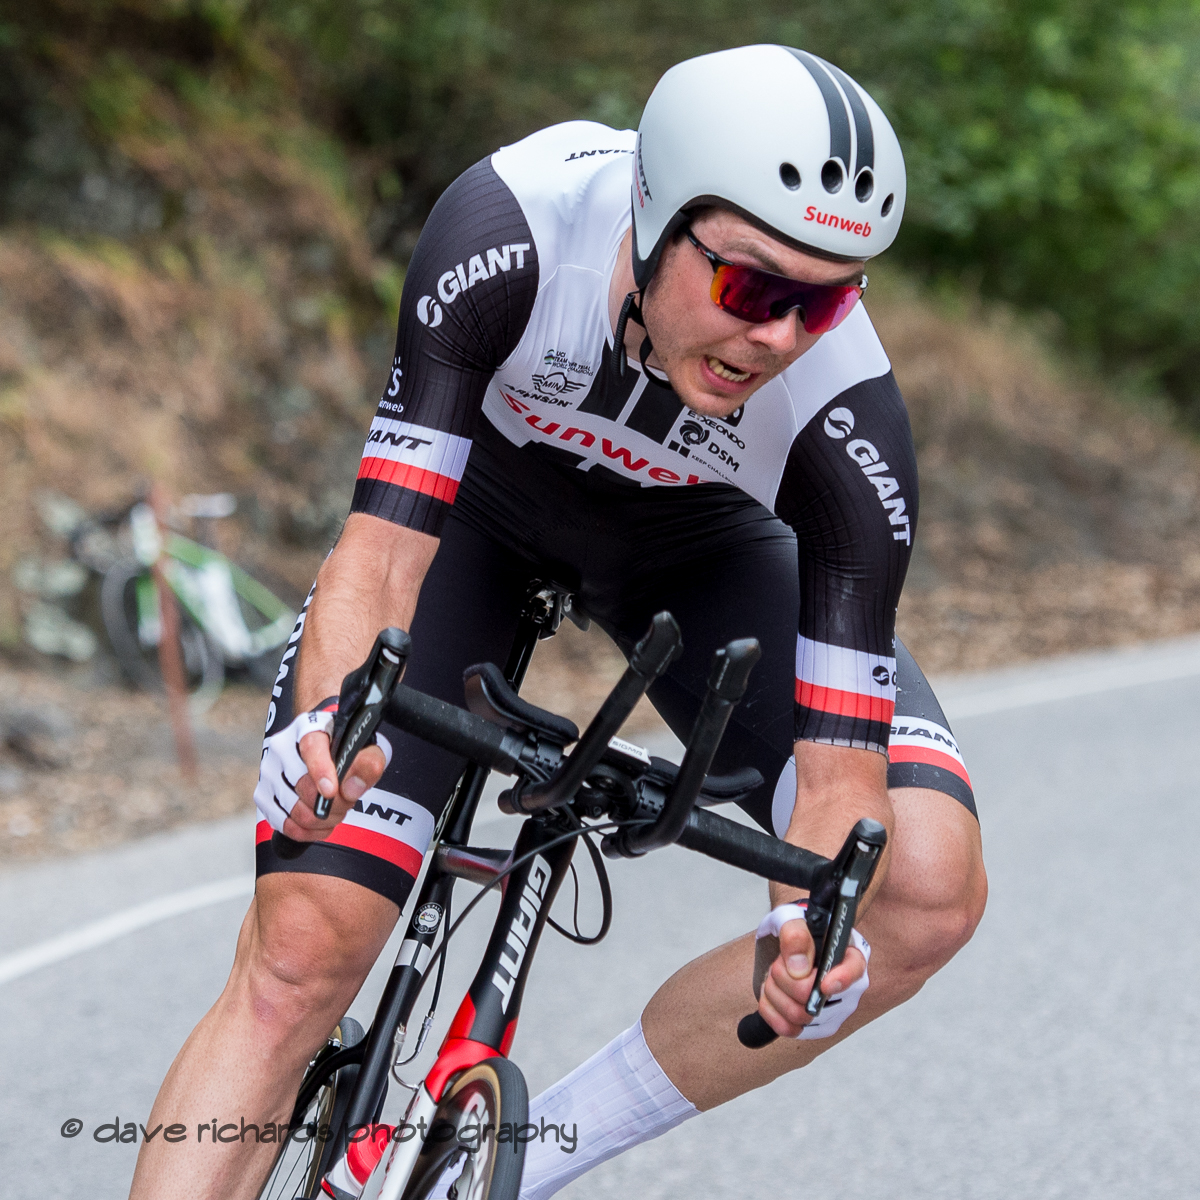 Team Sunweb rider hammers a tight turn on the Men's Stage Four, Individual Time Trial, Morgan Hill, 2018 Amgen Tour of California cycling race (Photo by Dave Richards, daverphoto.com)